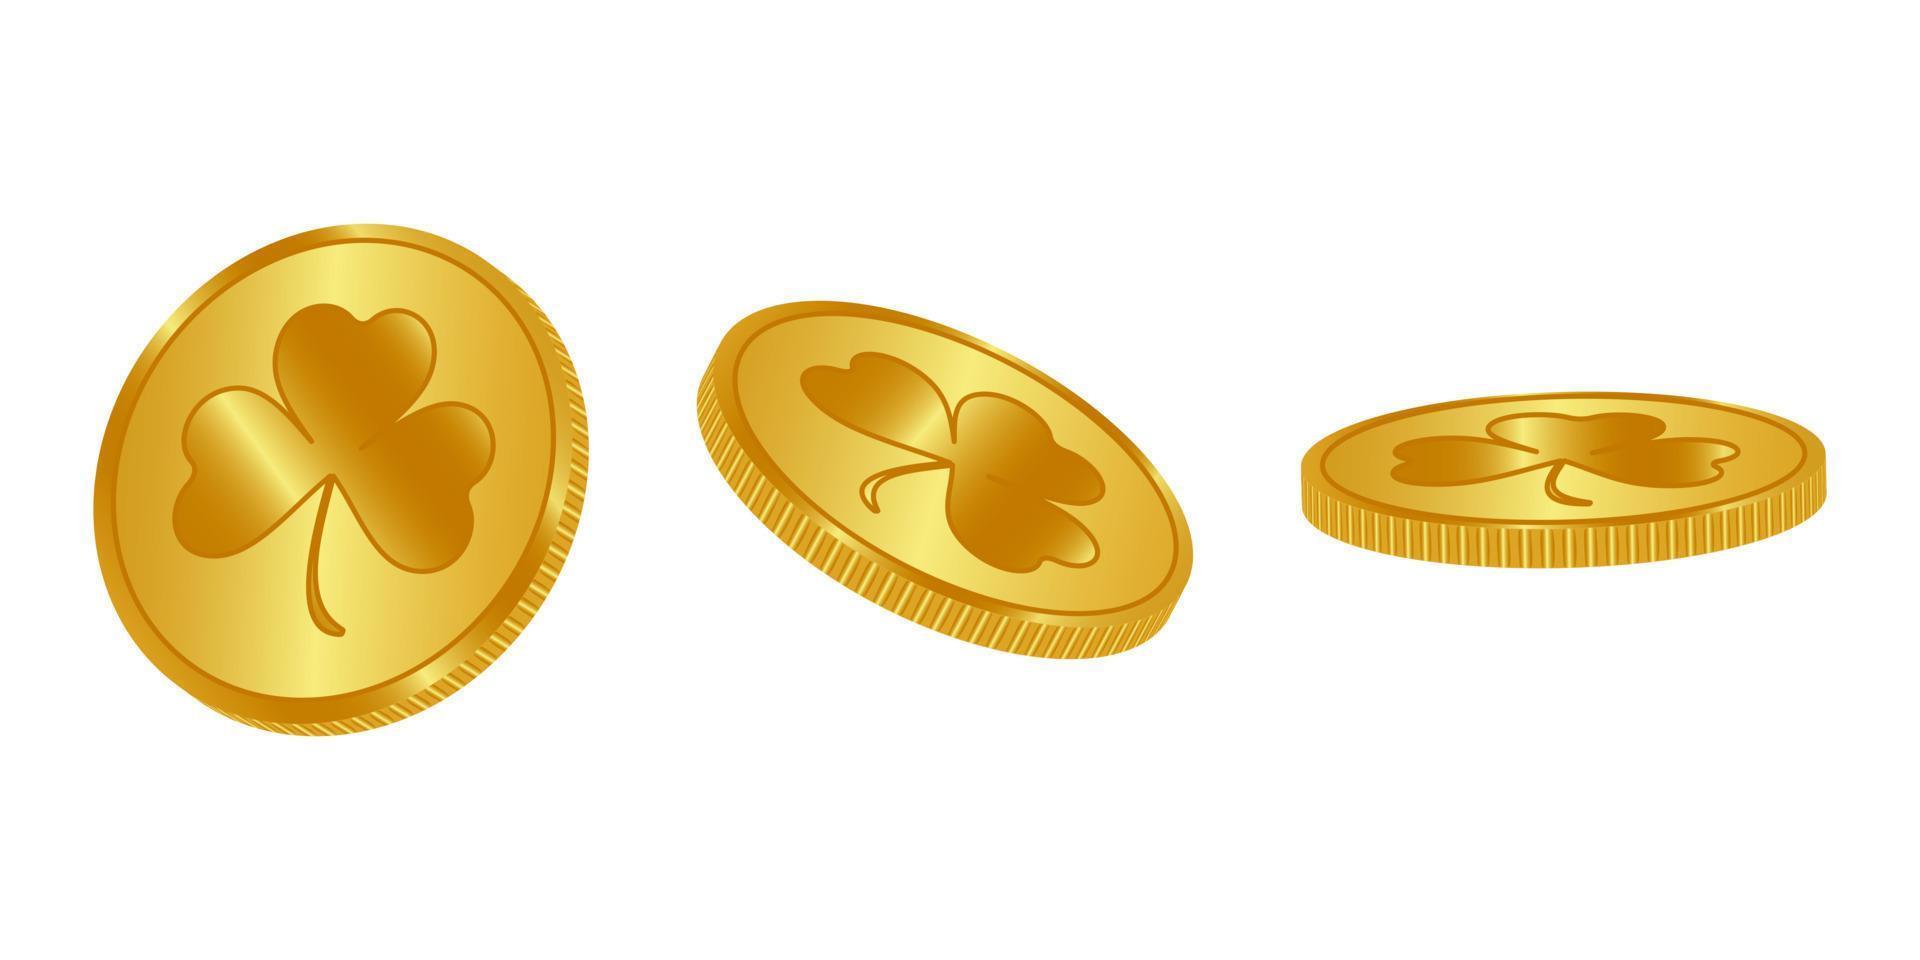 Gold coins with shamrock isolated on white in different positions. Coins with the sign of clover. Vector illustration.